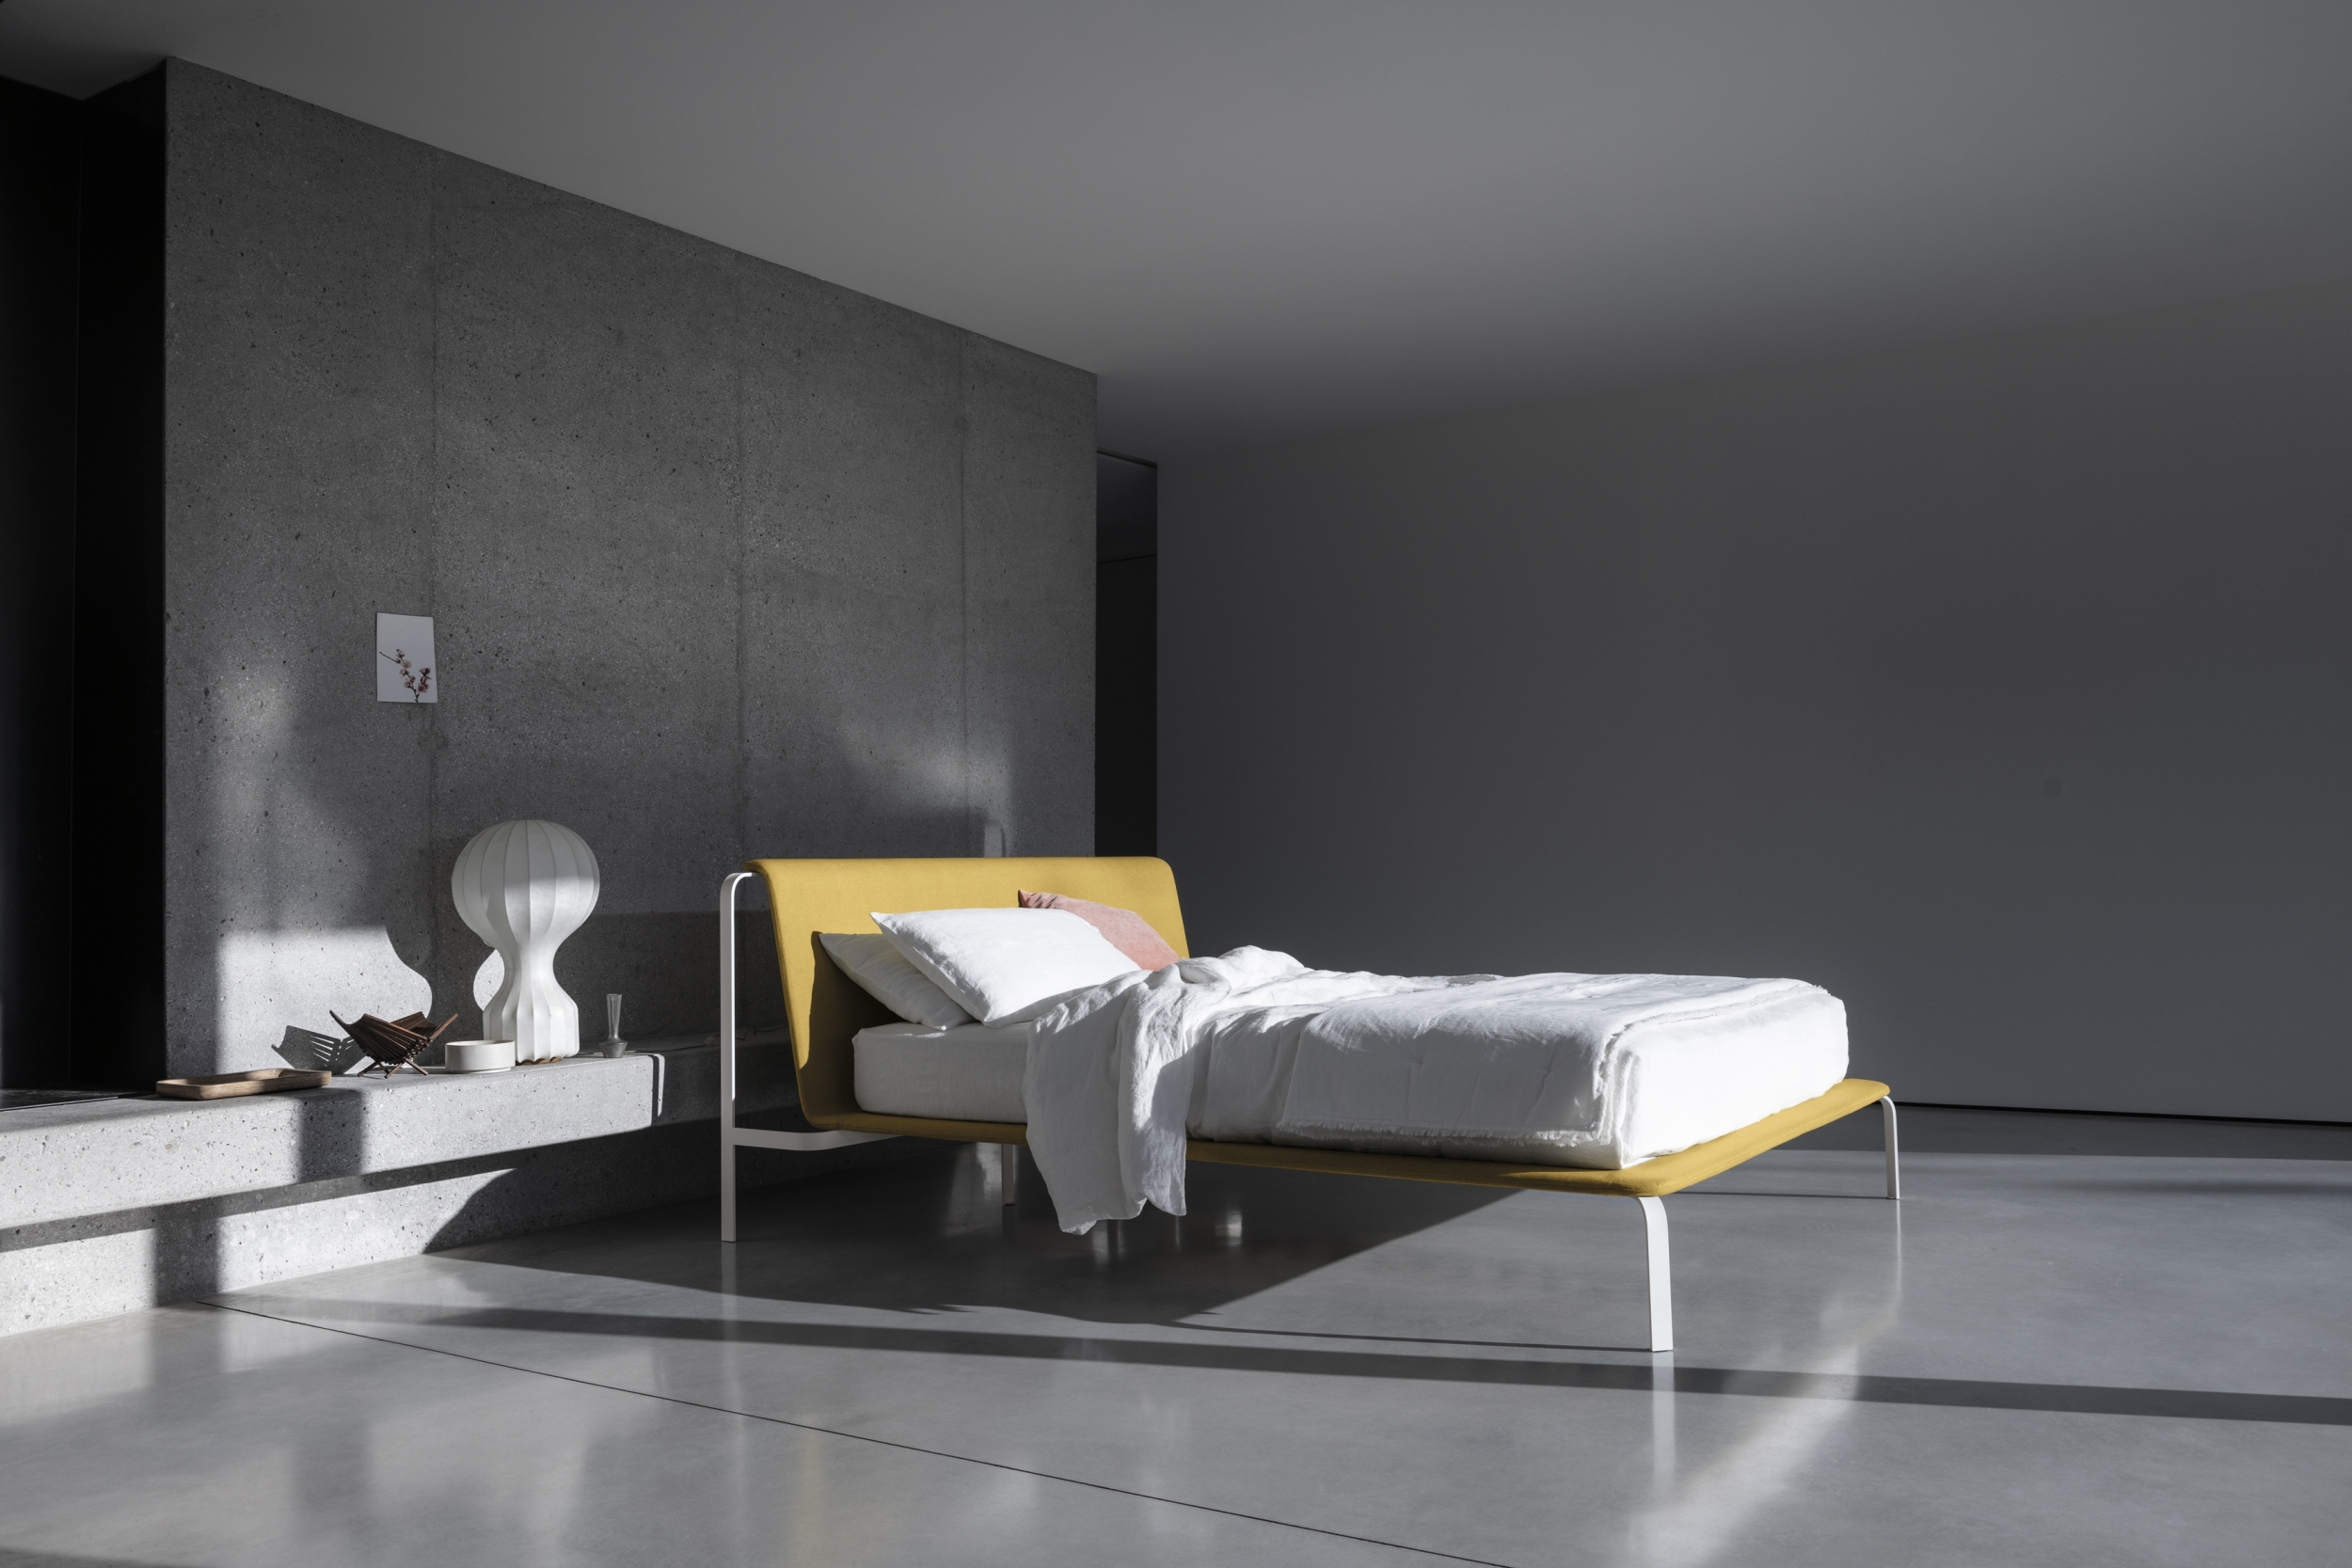 Bend Bed Collection